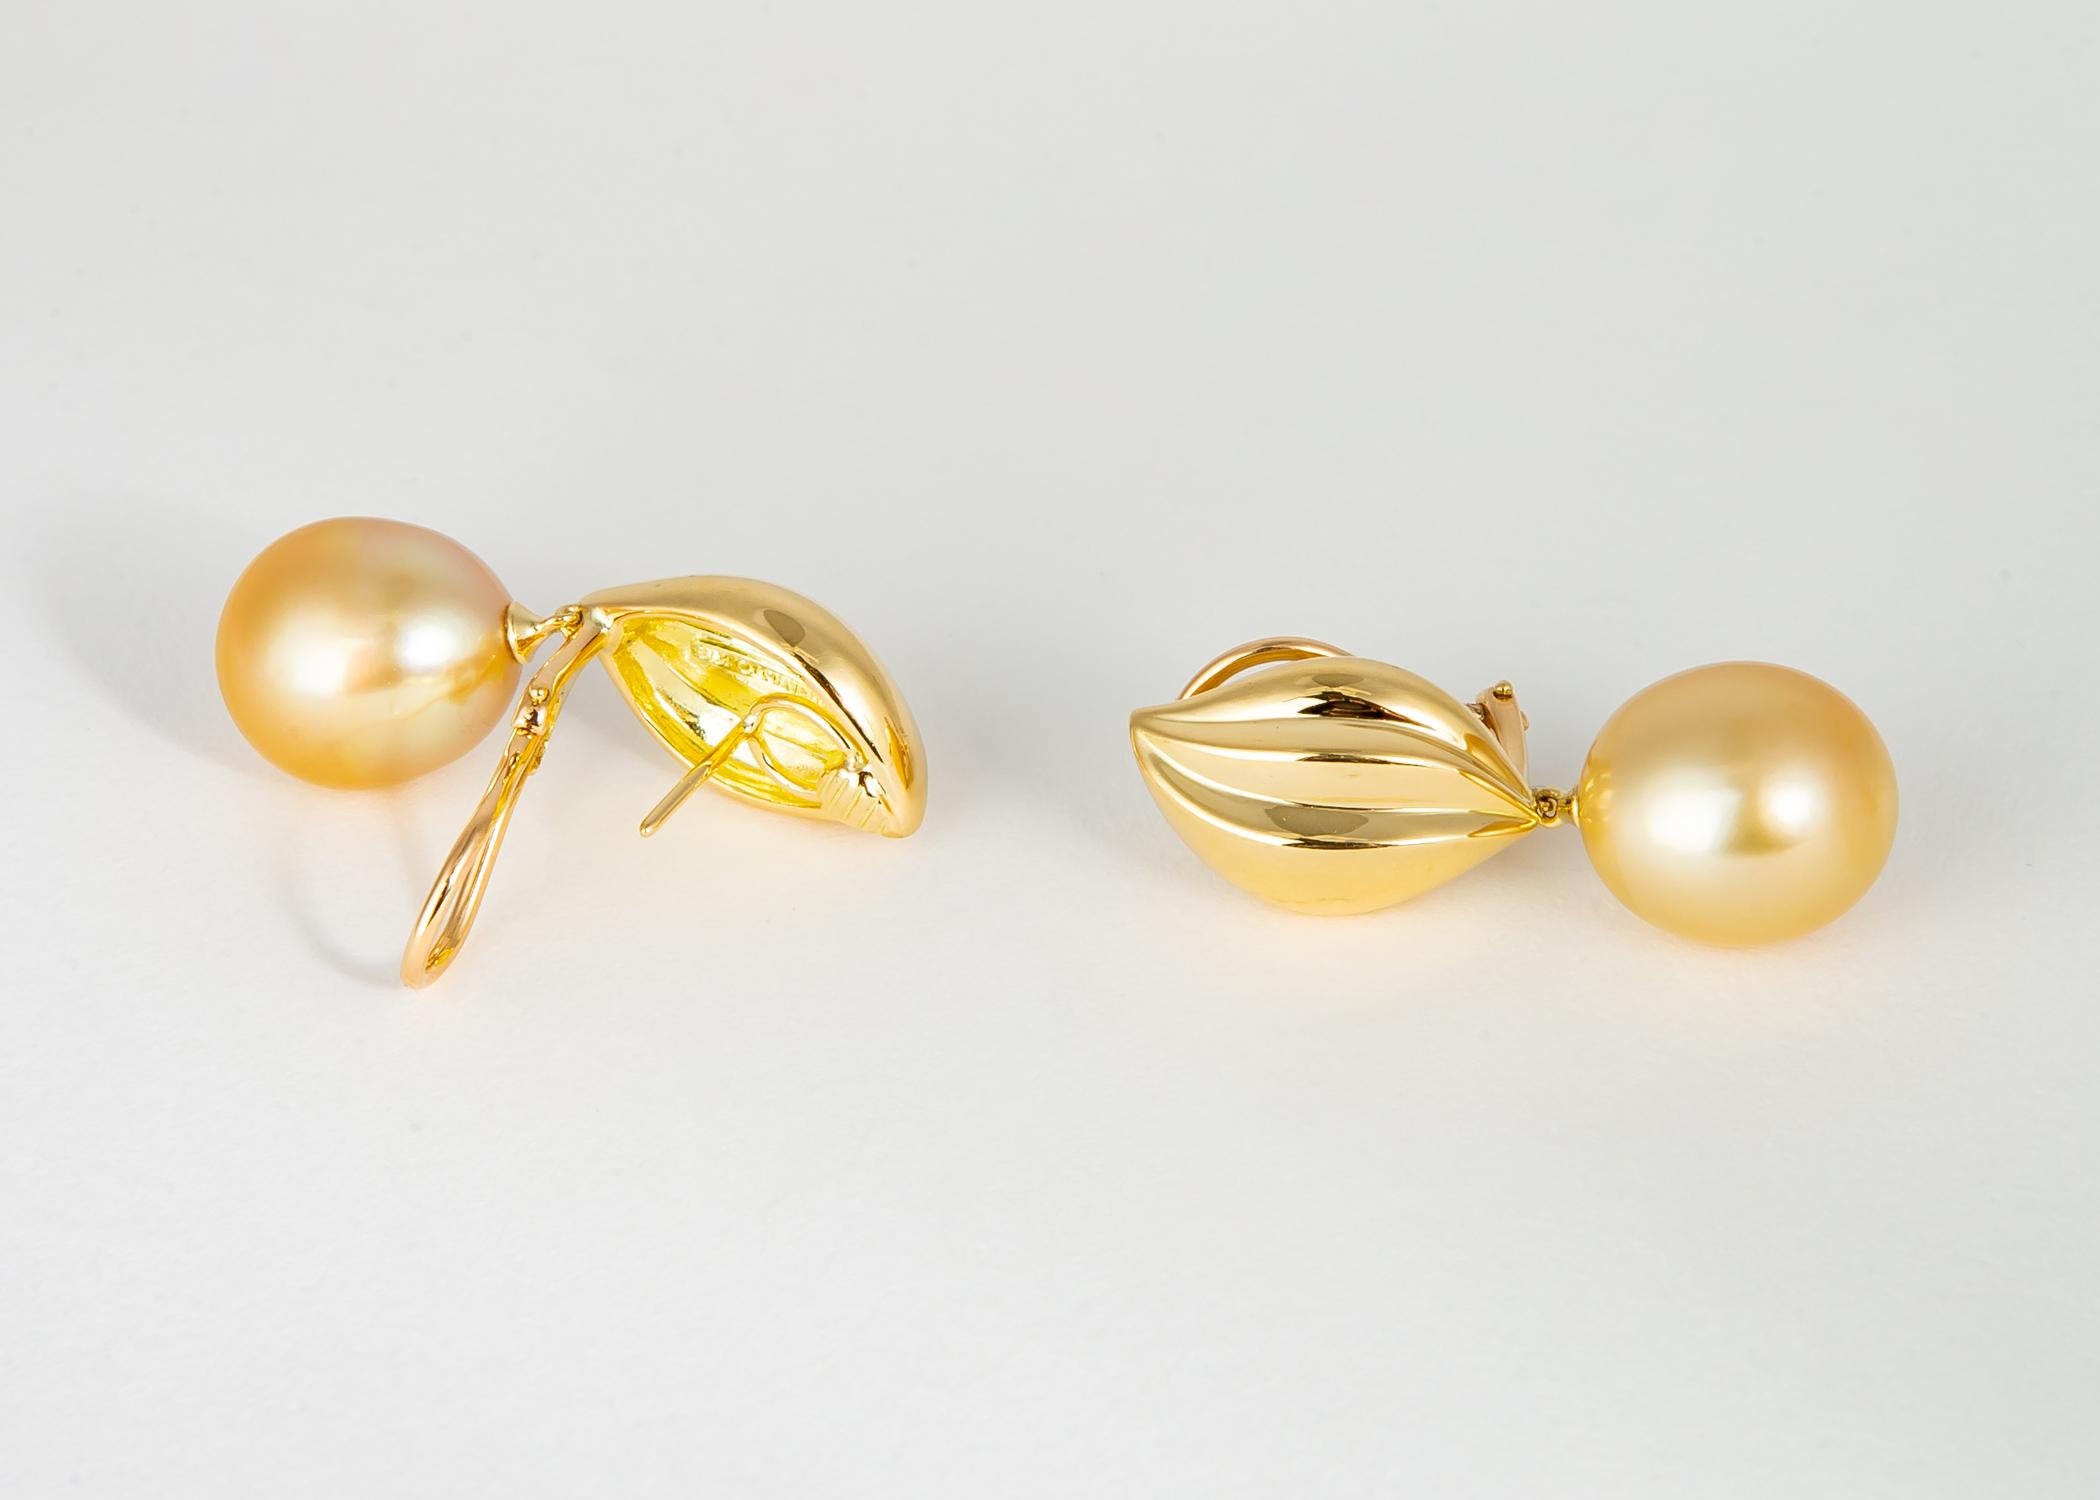 Mikimoto offers unwavering dedication to quality pearl jewelry. This beautiful matched pair of rich golden south sea pearls ( 14.6 x 12.9 mm ) are suspended from elegant 18k gold tops. Simply Chic !!! 1 1/3 inches in length. 